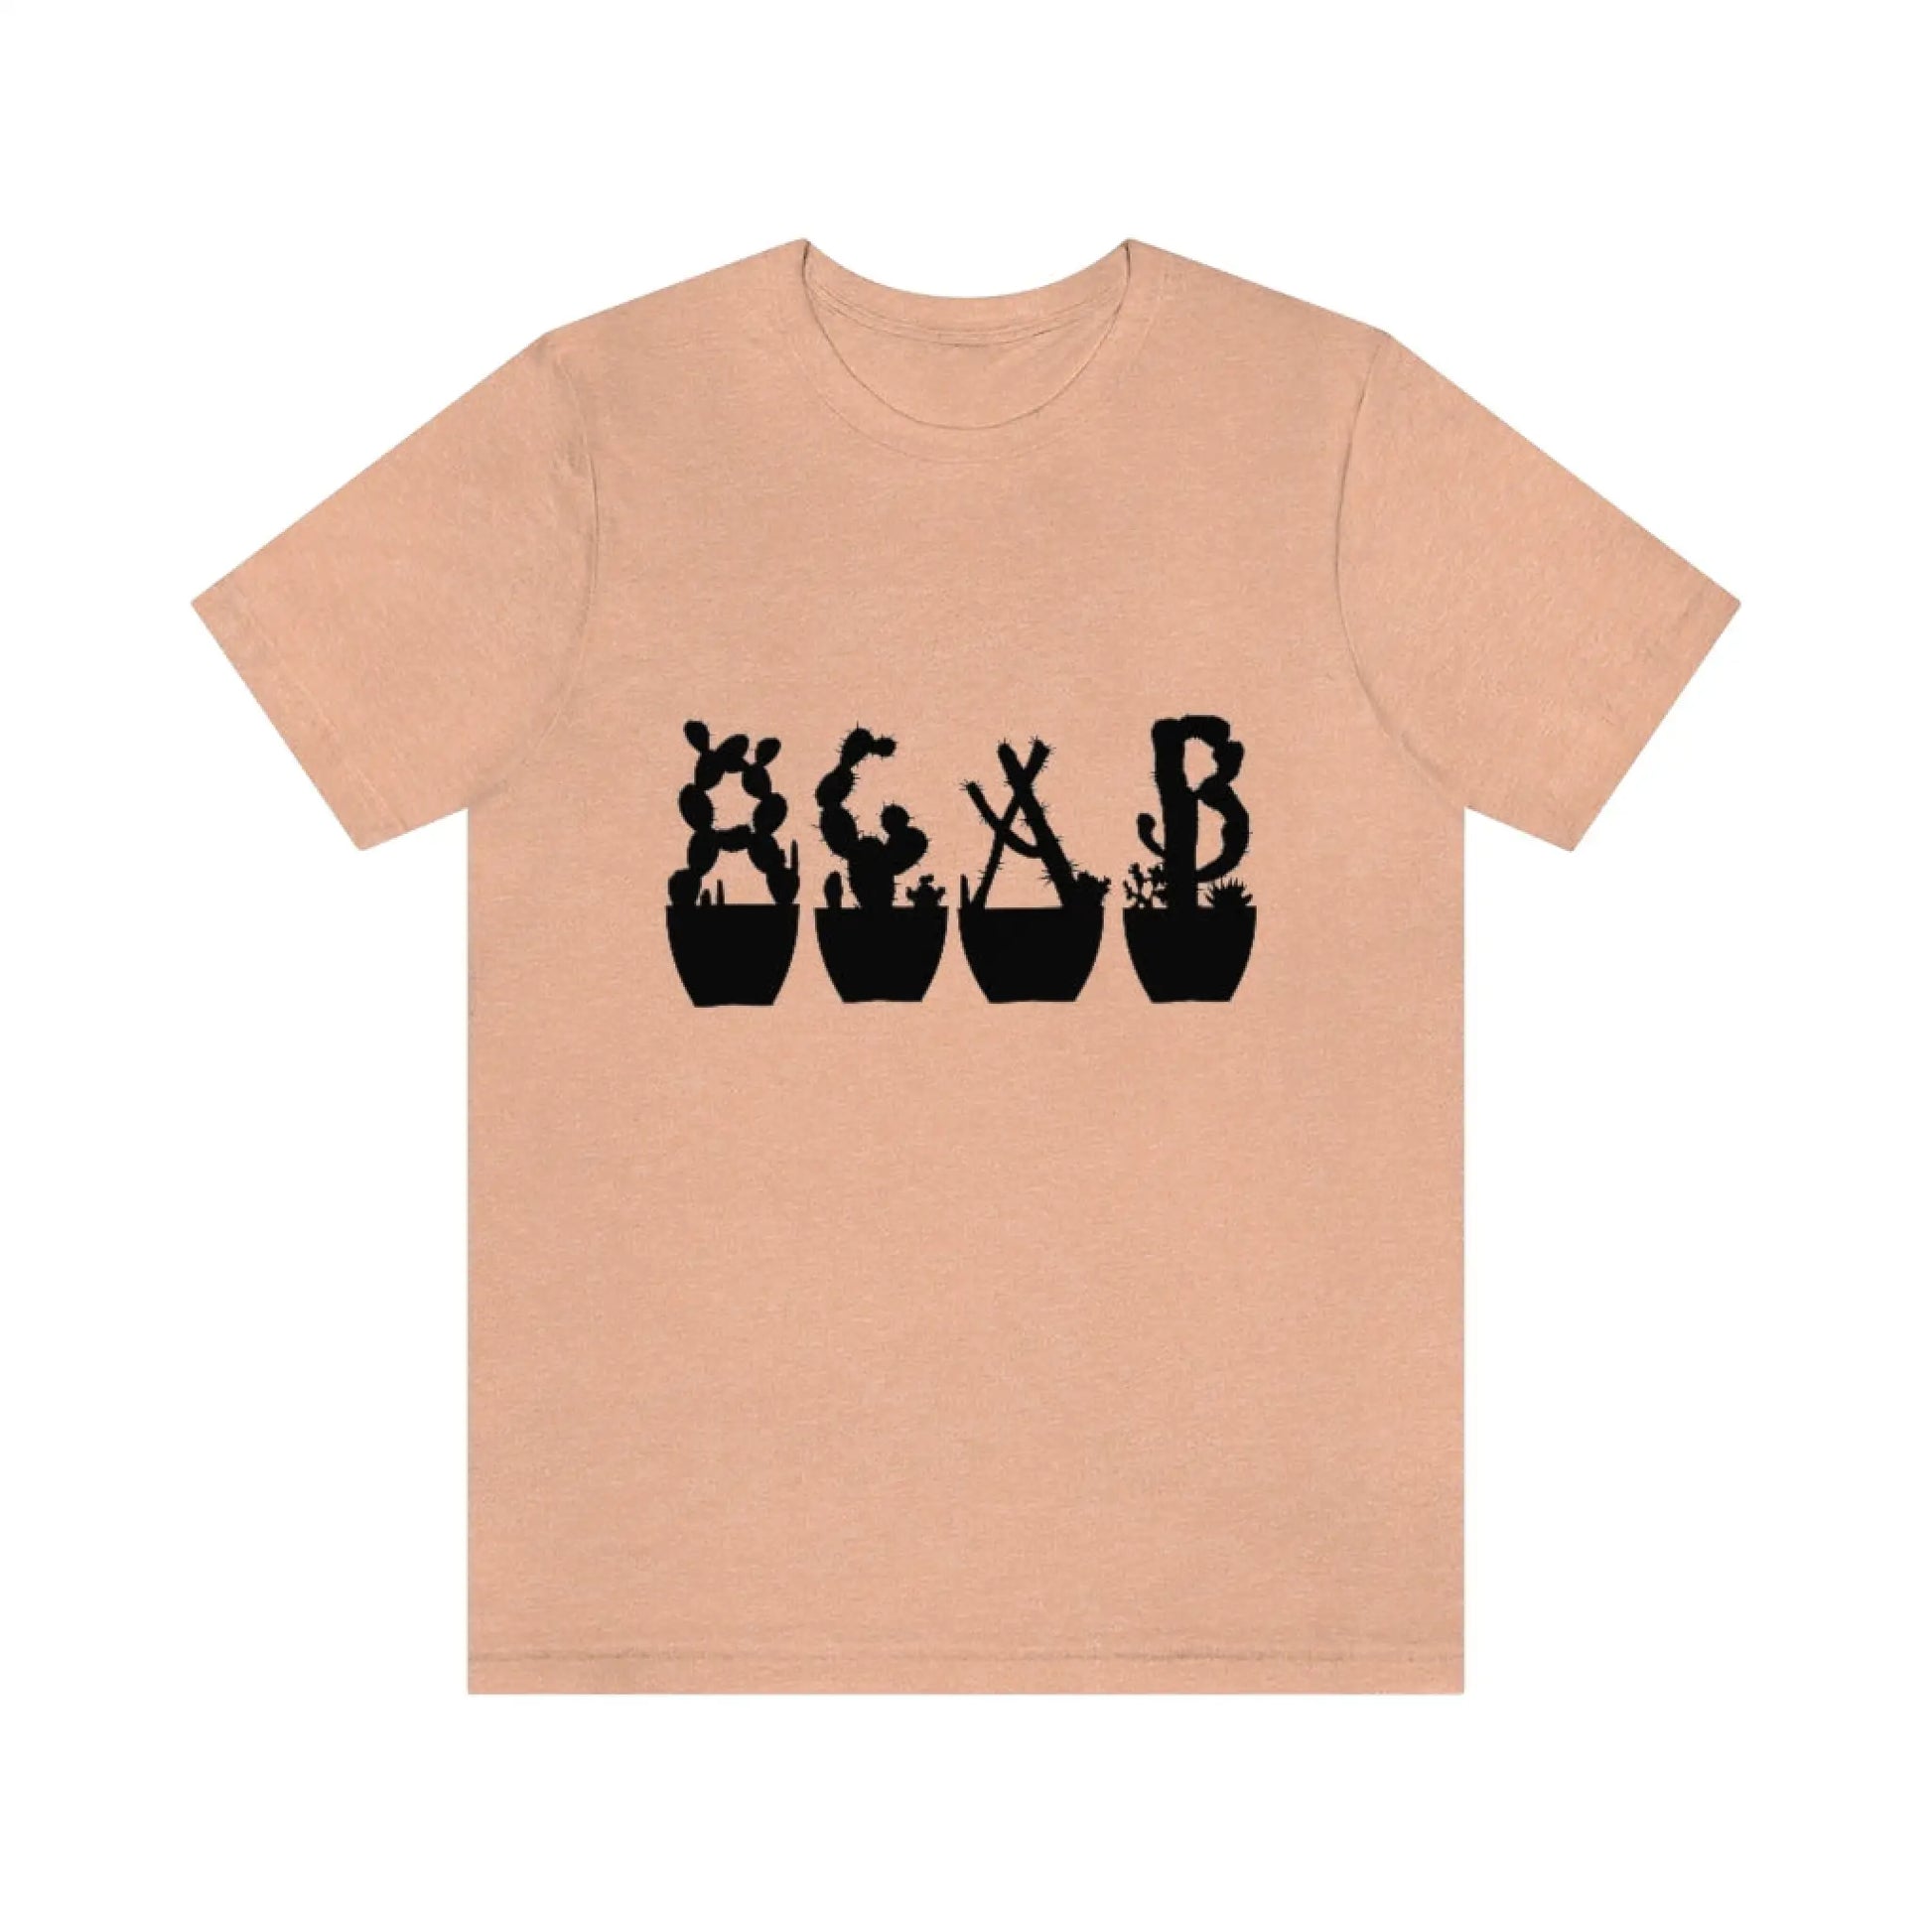 Shirts - Just Beautiful Cactuses - Heather Peach / S -